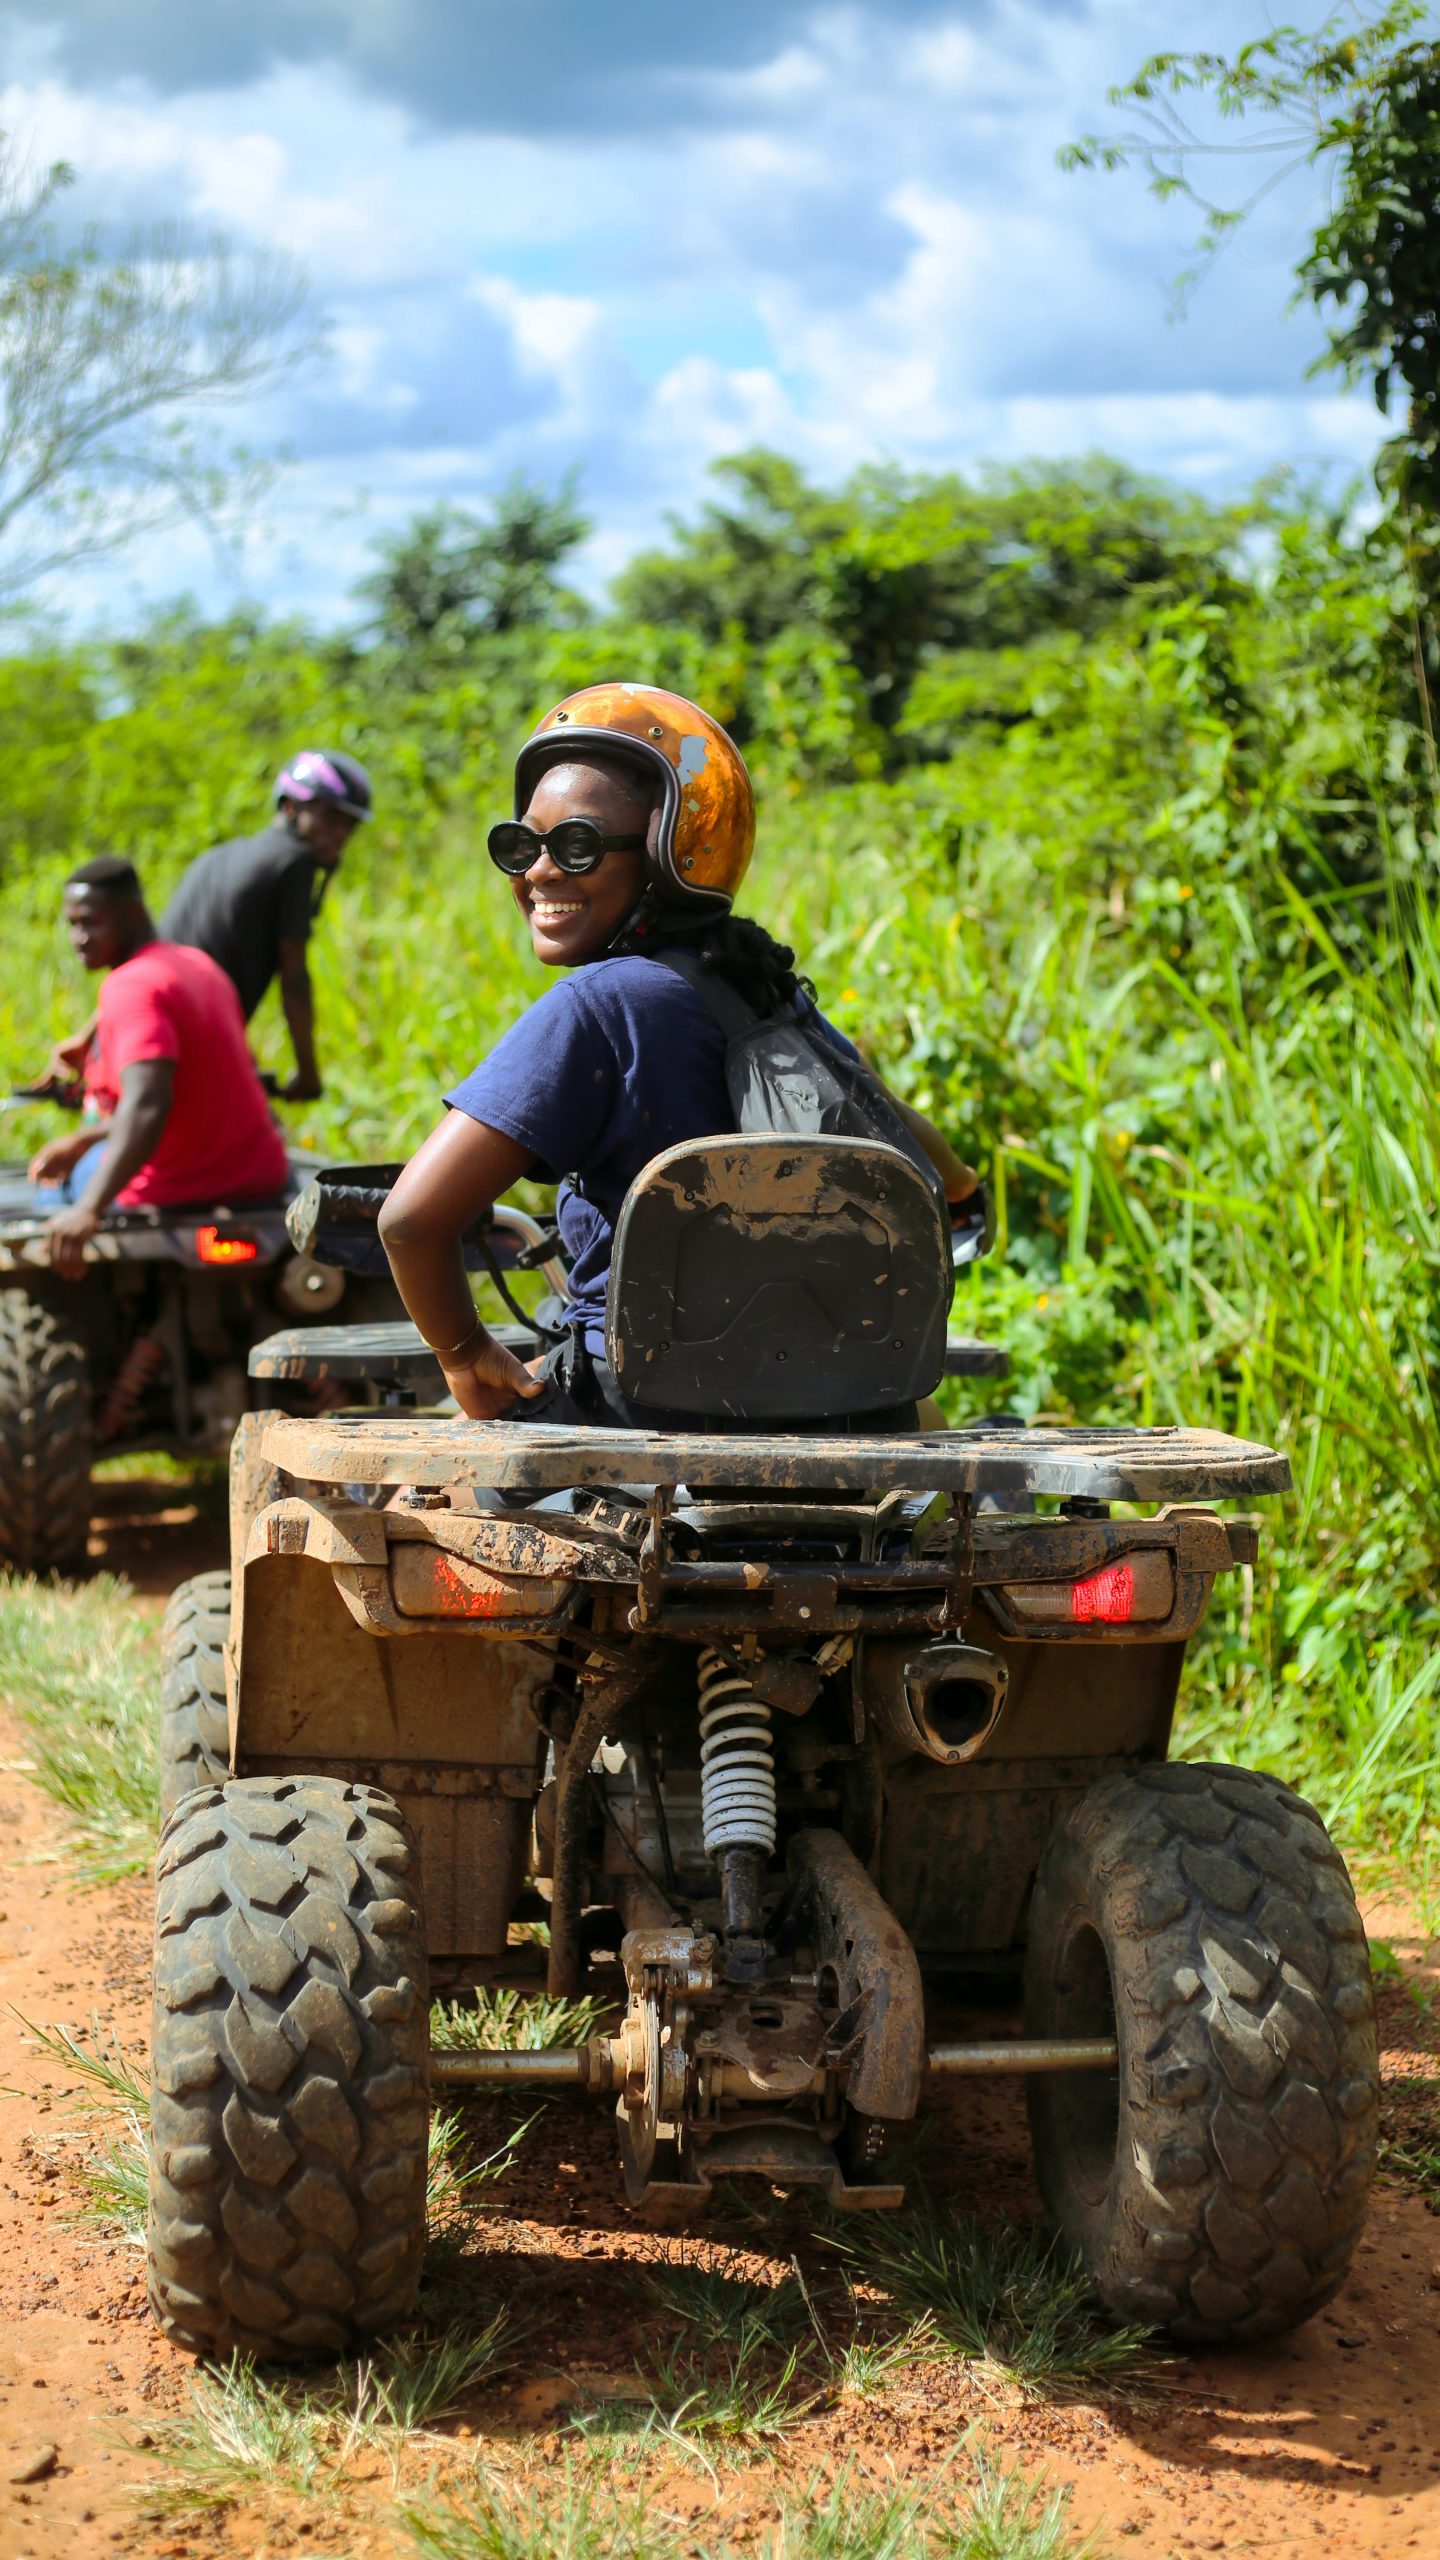 Person riding a four-wheeler in a jungle setting looking back at the camera smiling